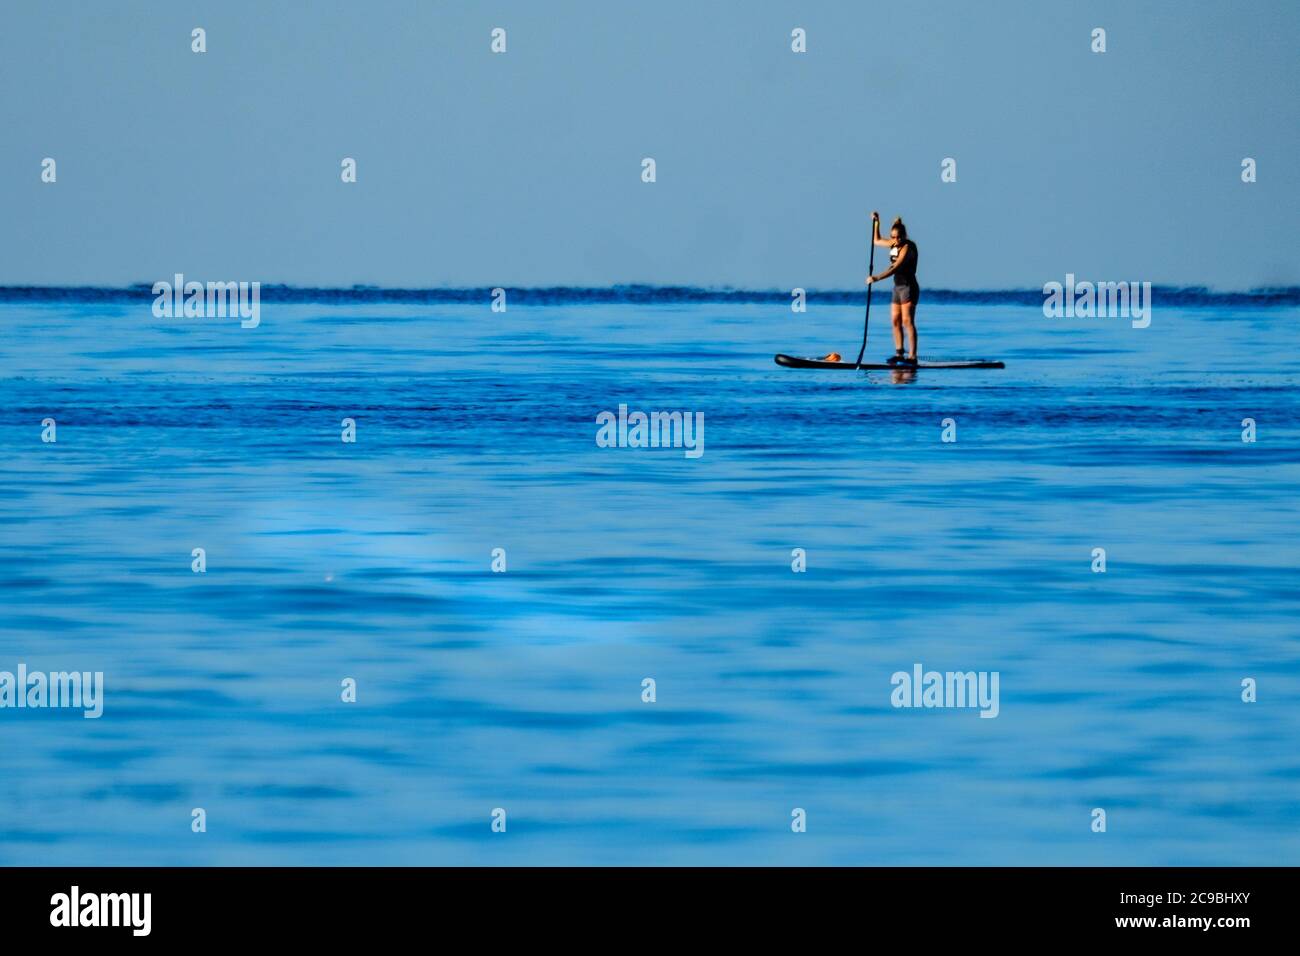 Worthing Beach, Worthing, UK. 30th July, 2020. Paddleboarders enjoy the calm morning sea . With a clear blue sky and flat waters people on paddle boards enjoy the early morning off the sussex coast. Rampion Wind Farm can be seen 13-20km offshore. Picture by Credit: Julie Edwards/Alamy Live News Stock Photo